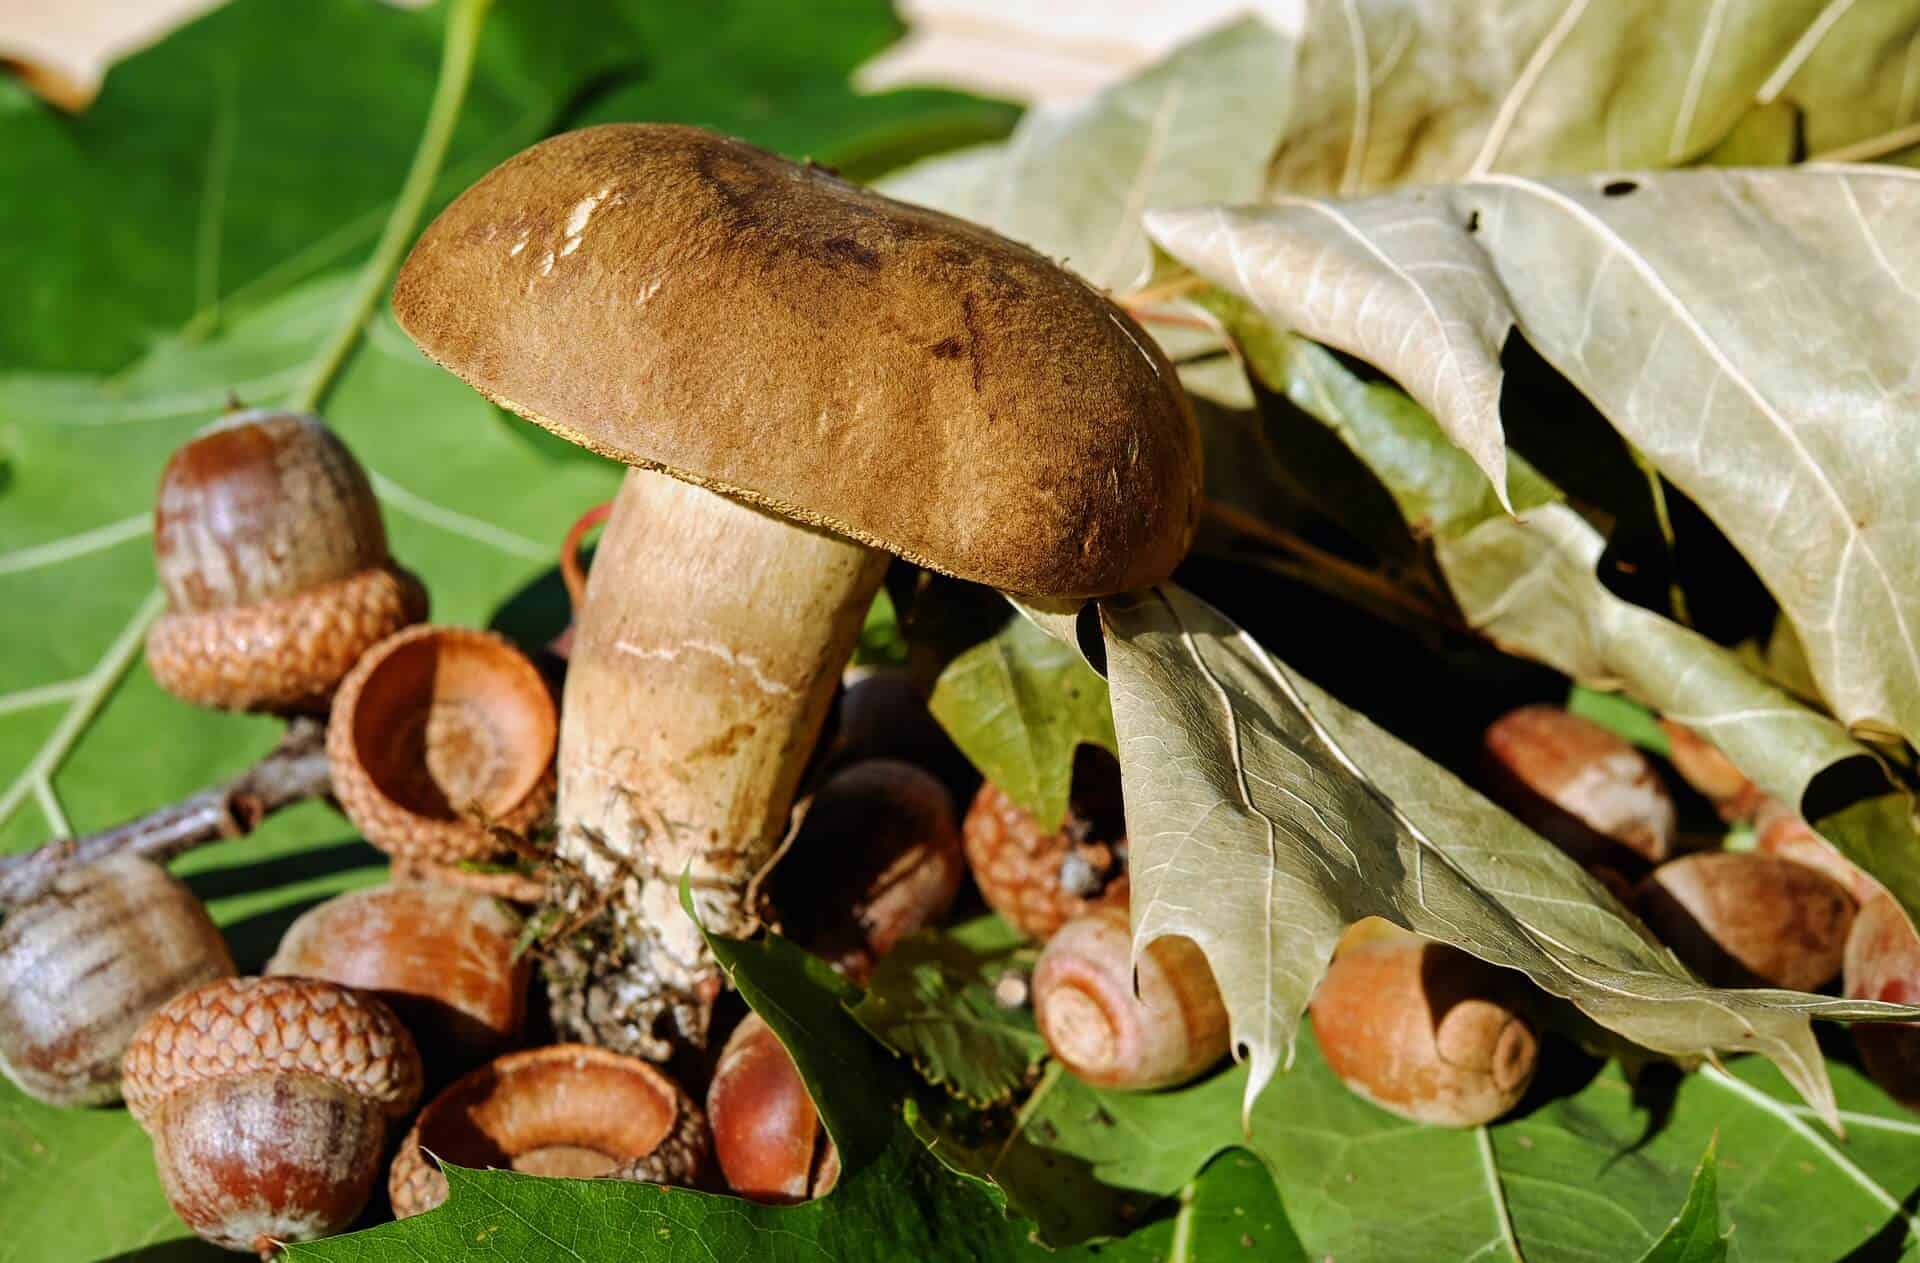 Know the forest fruits and mushrooms